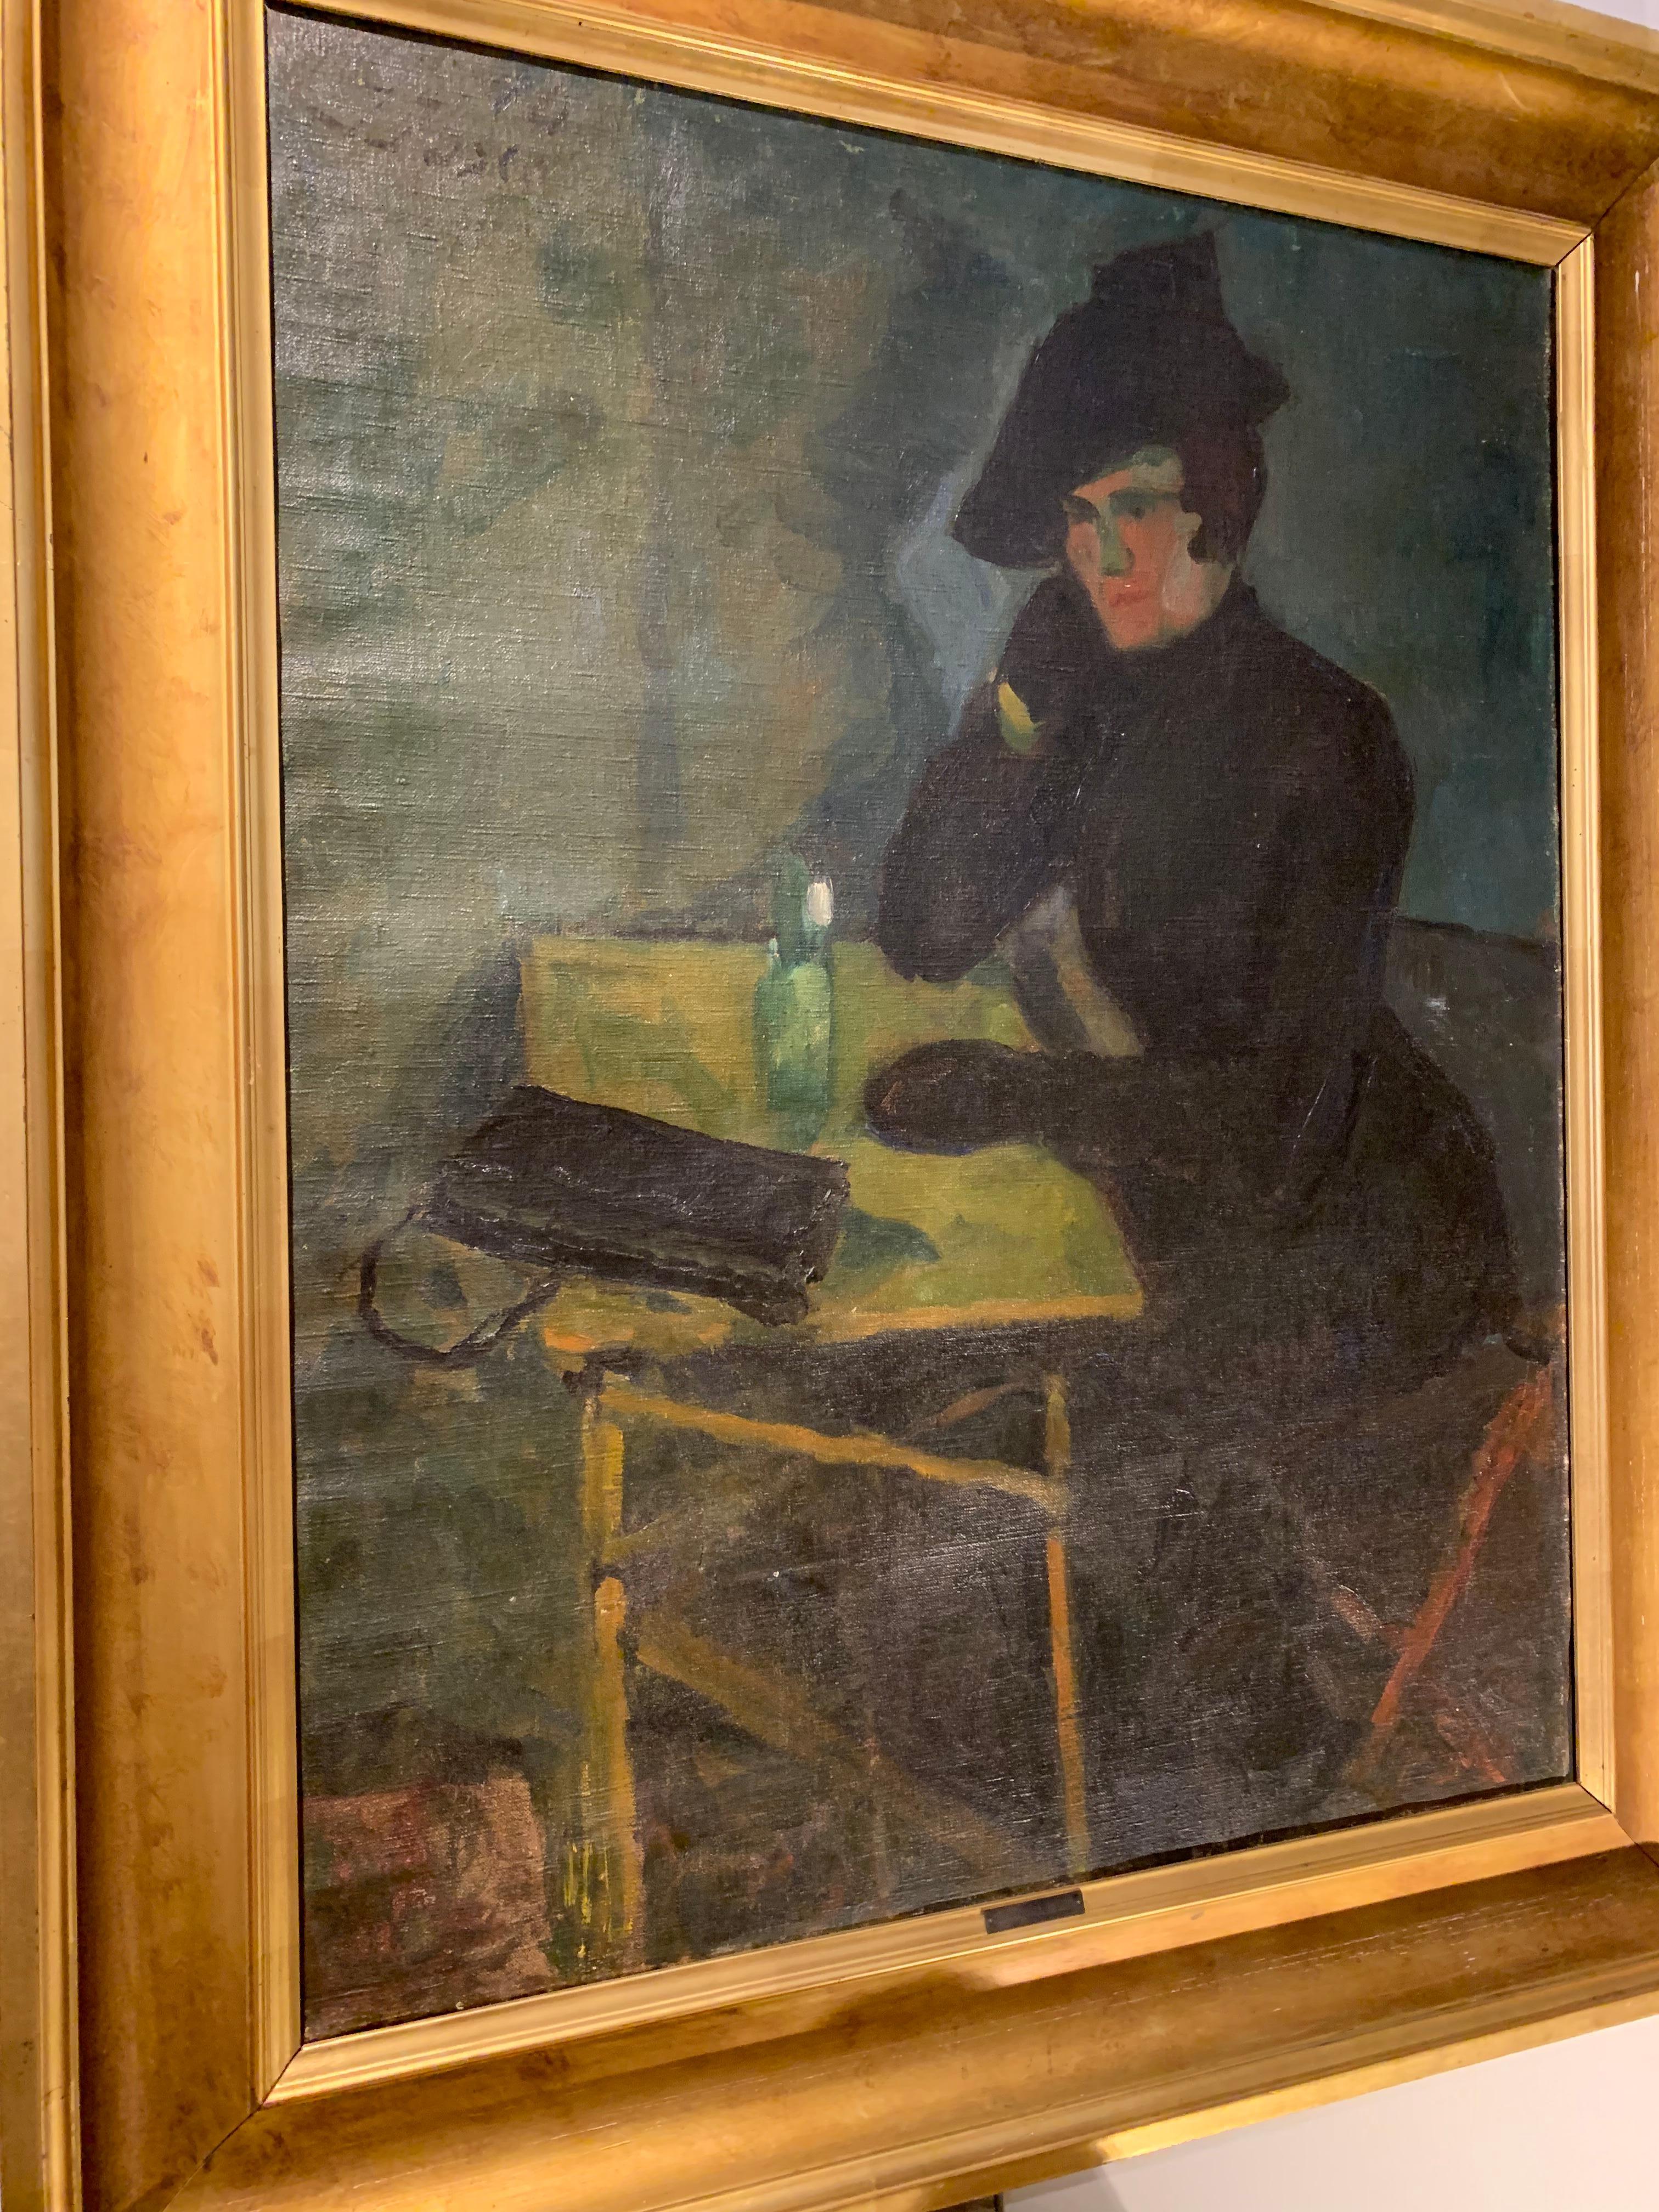 A striking deep framed oil painting on canvas of a Lady formally dressed in black seated at a table with a blue background.

The artist Immanuel Ibsen (1887-1944) was a Danish impressionist and modern painter.

Believed to have been hung in